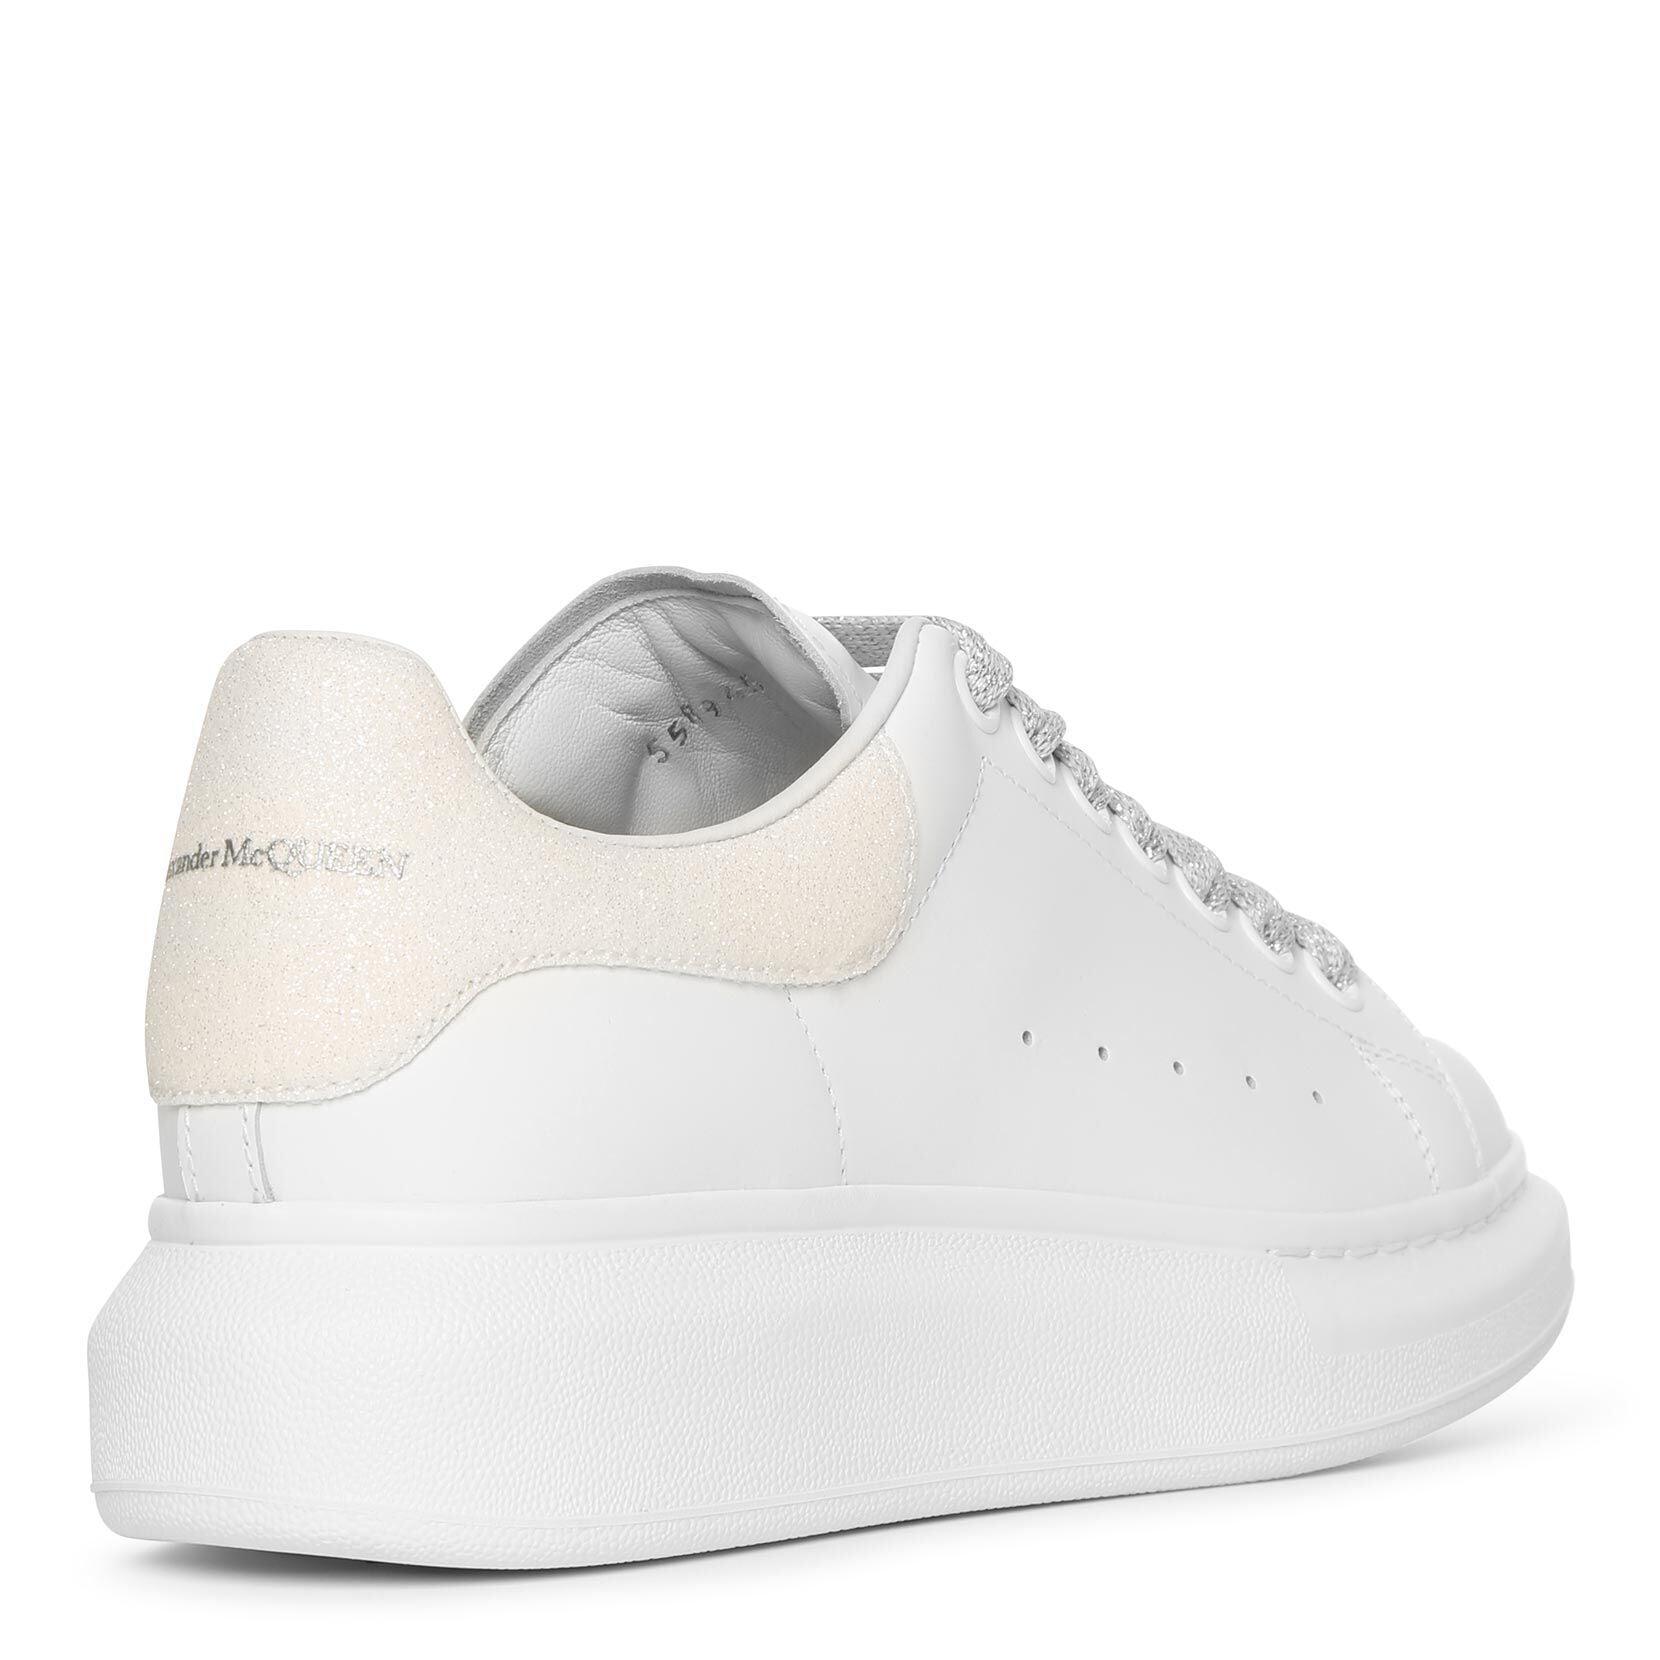 White and glitter classic sneakers